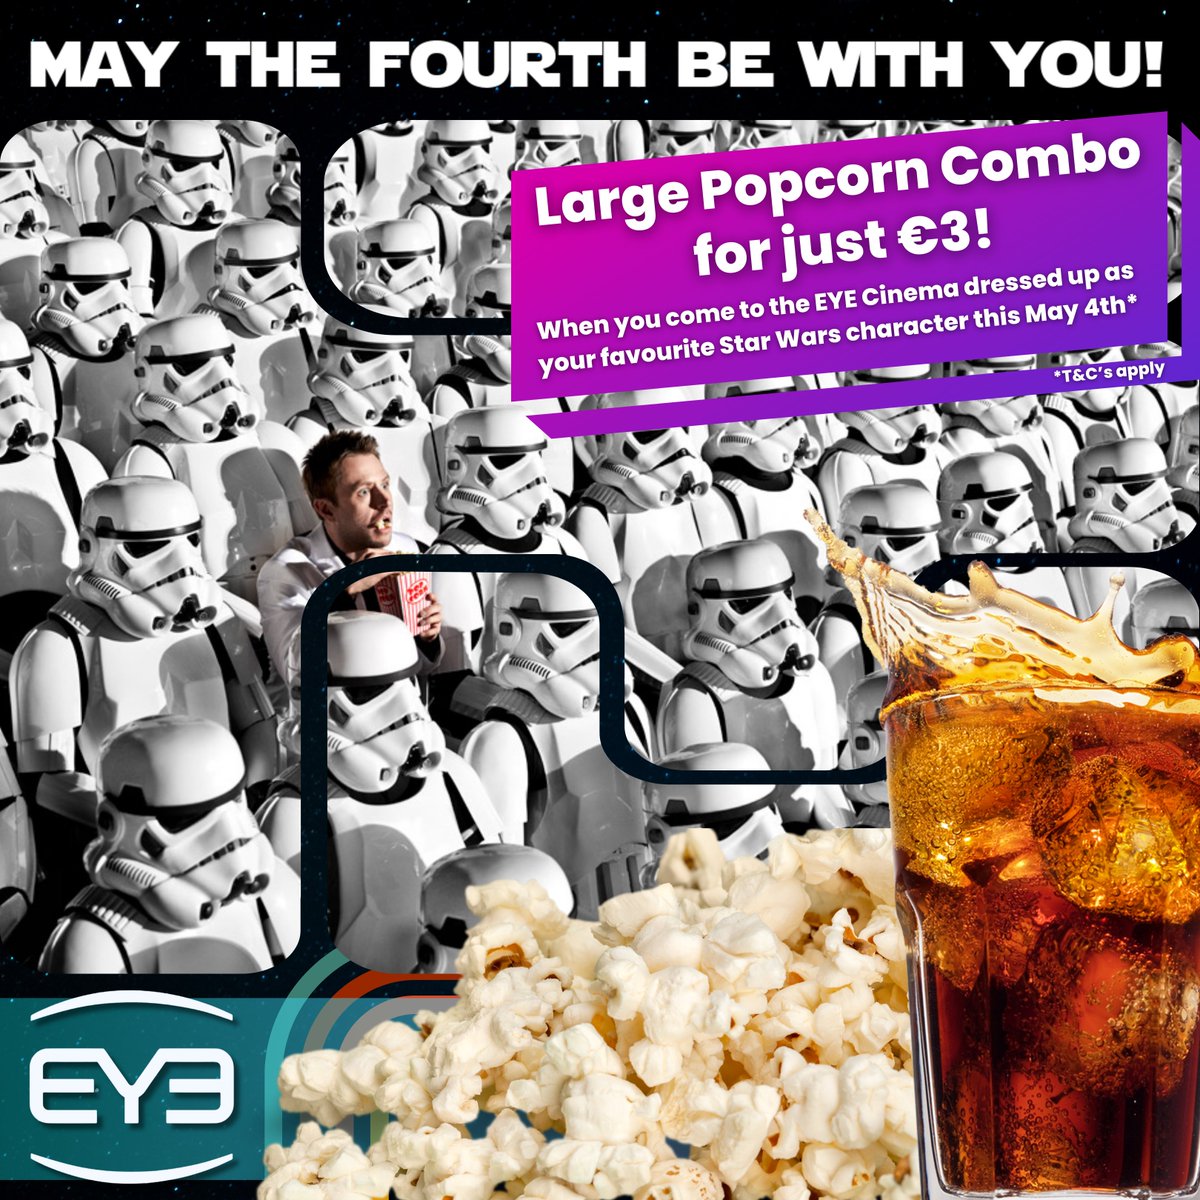 To mark #MayThe4th @eyelovemovies will be screening ‘Star Wars: Episode I – The Phantom Menace’ for its 25th Anniversary and any fans that dress up as their favourite character will get a Large Popcorn Combo for just €3! Visit eyecinema.ie to book your tix!